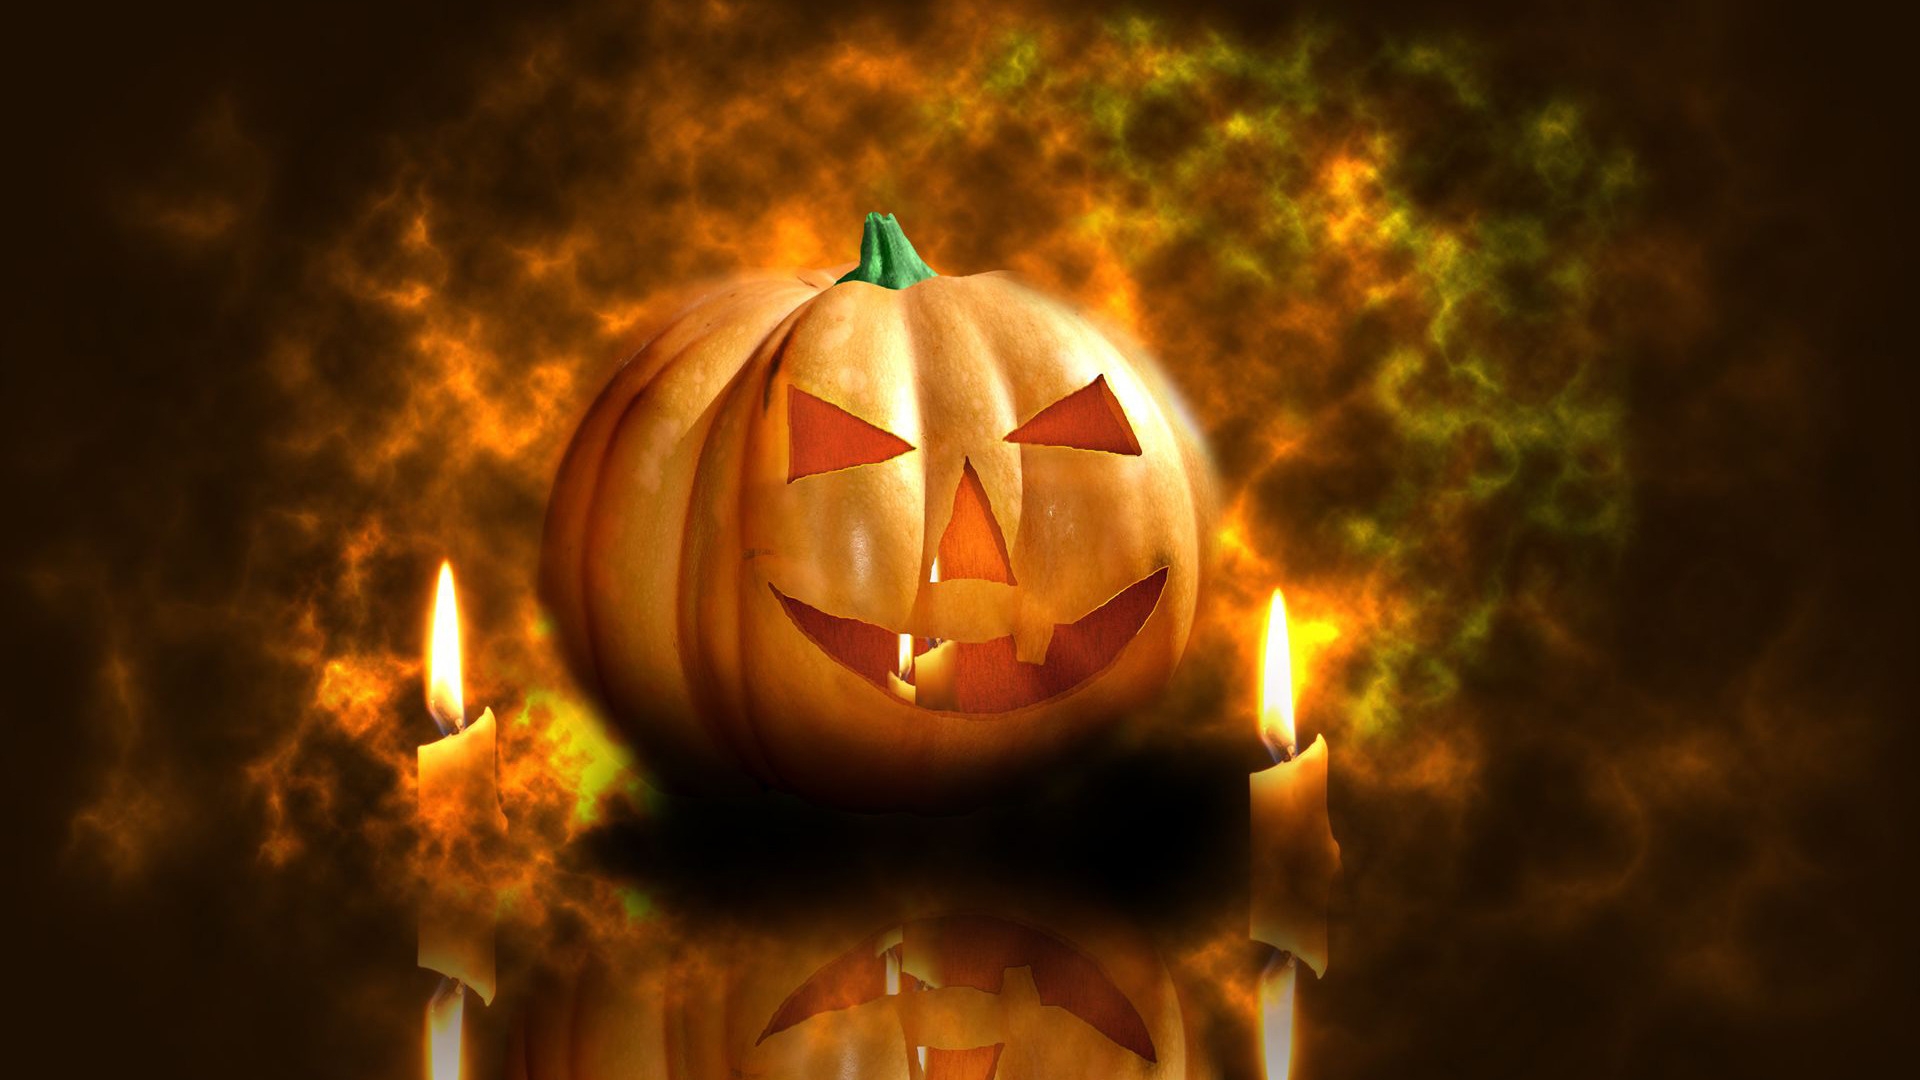 Pumpkin and Candles for 1920 x 1080 HDTV 1080p resolution